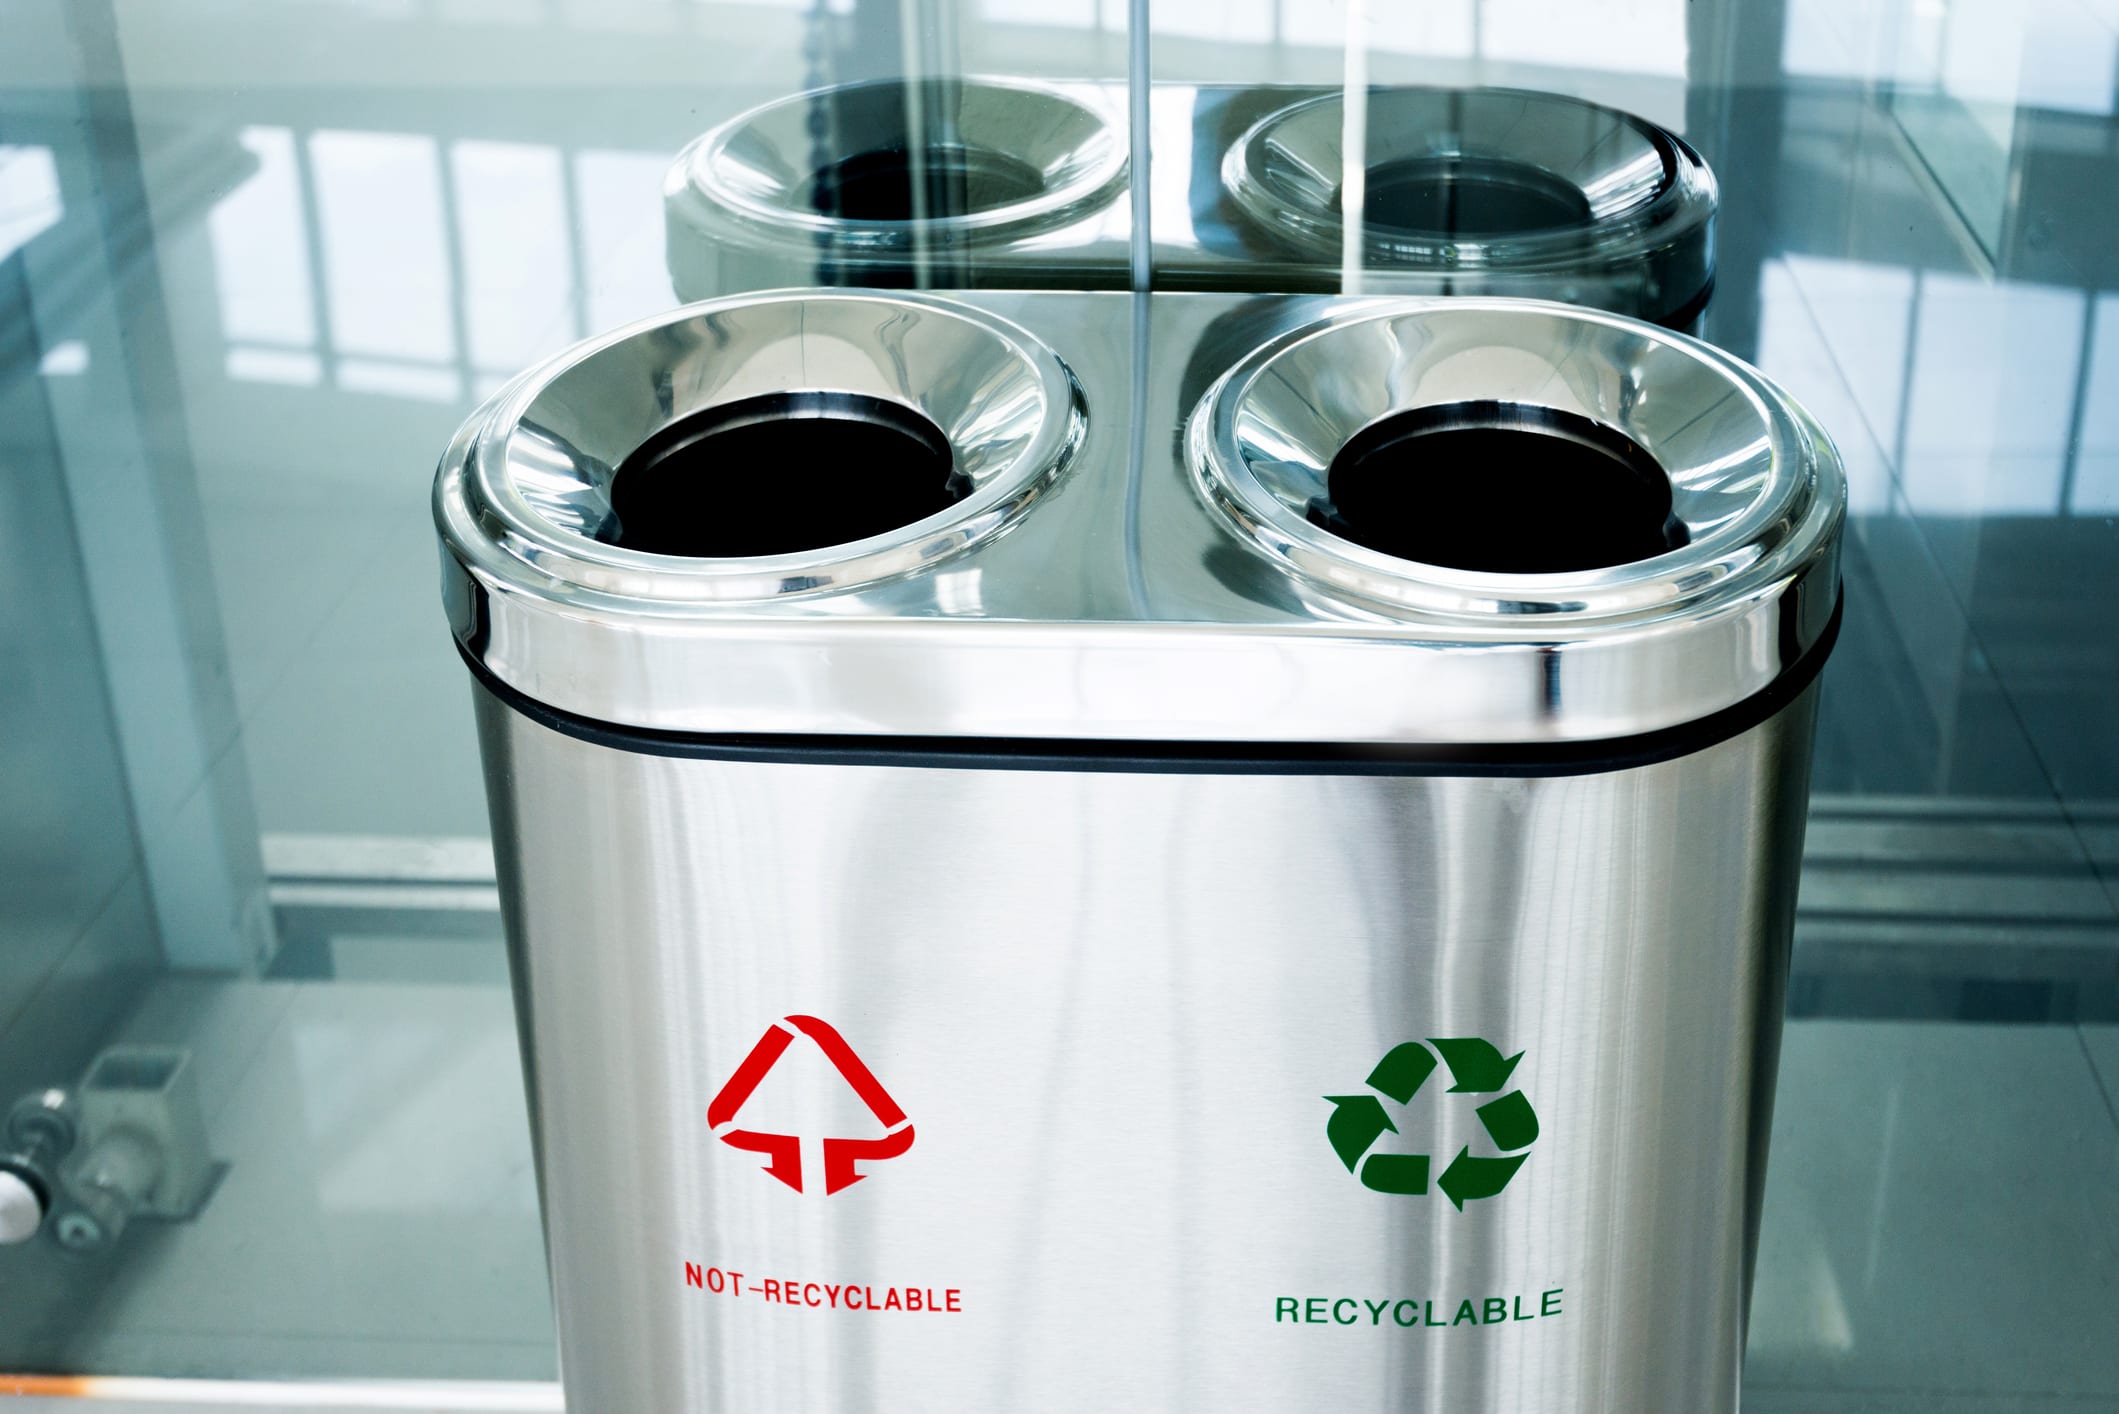 Recyclable and non-recyclable garbage can indoors.